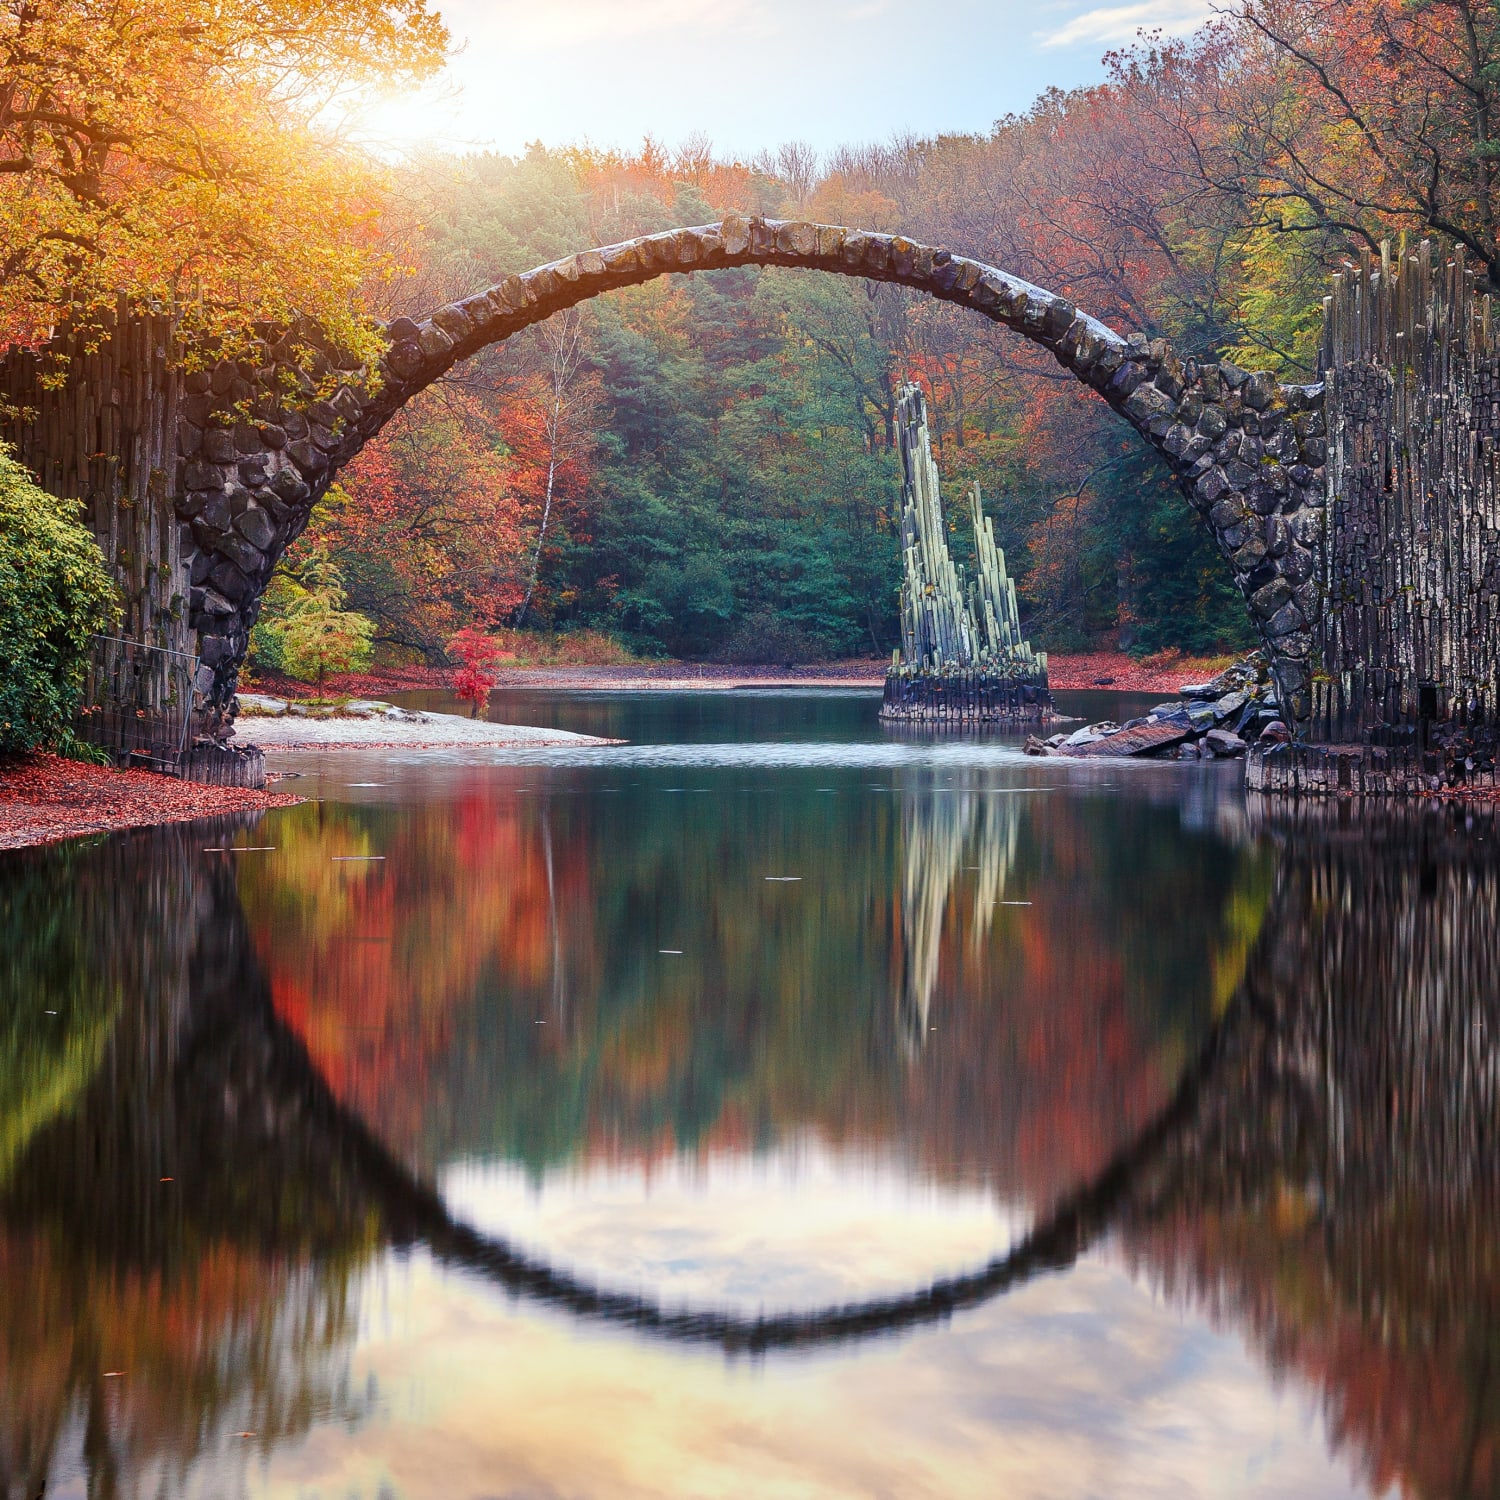 The arch on this bridge in Germany forms a perfect circle when the waters are calm.